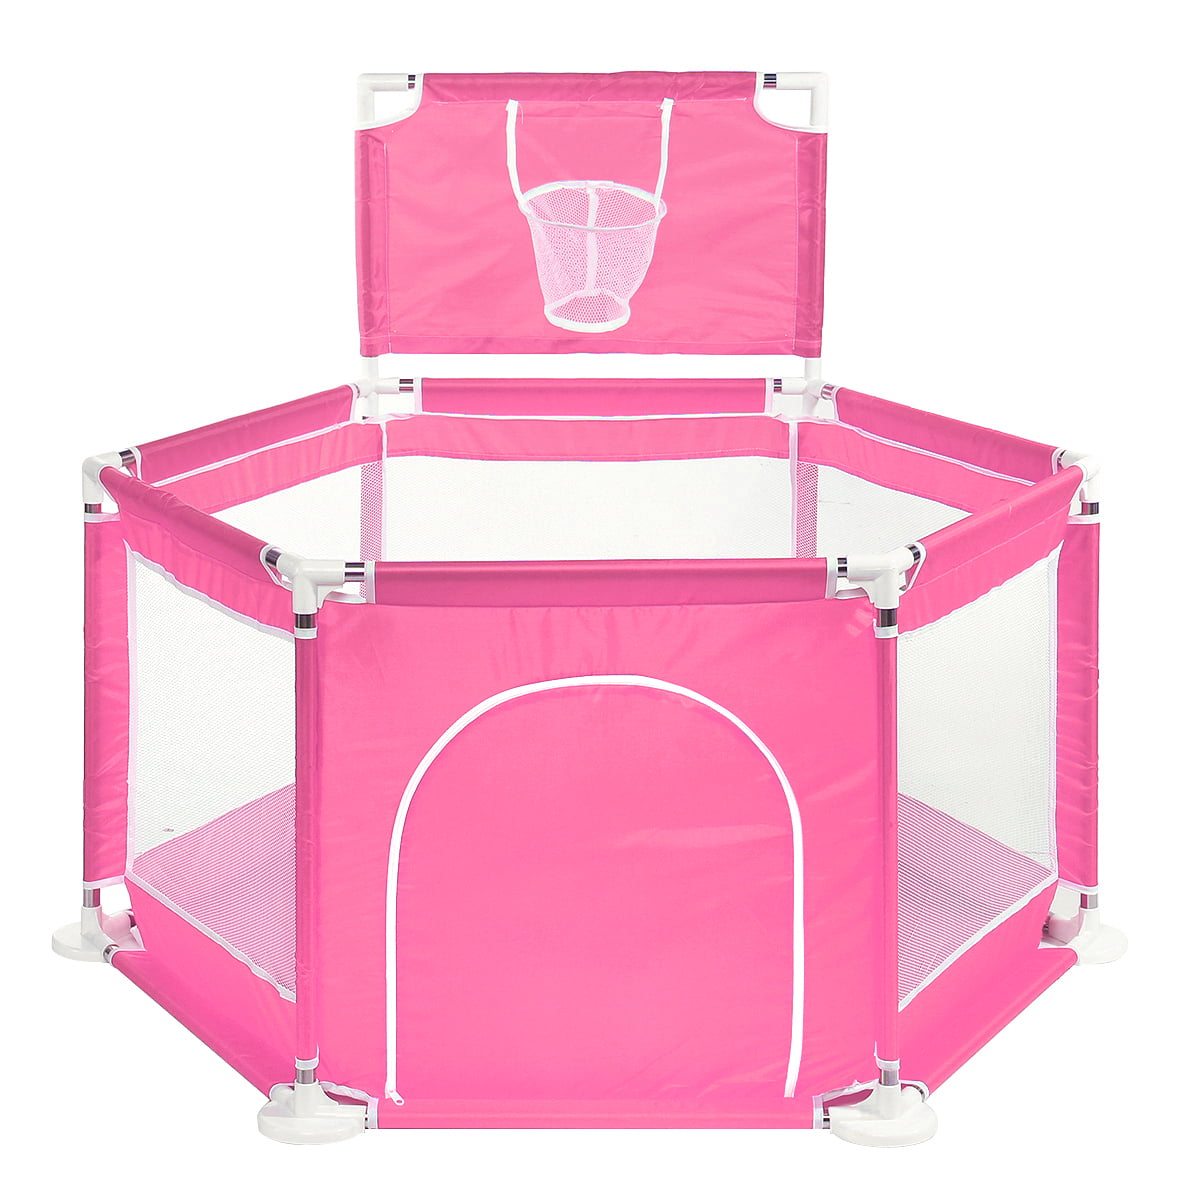 round playpen for babies